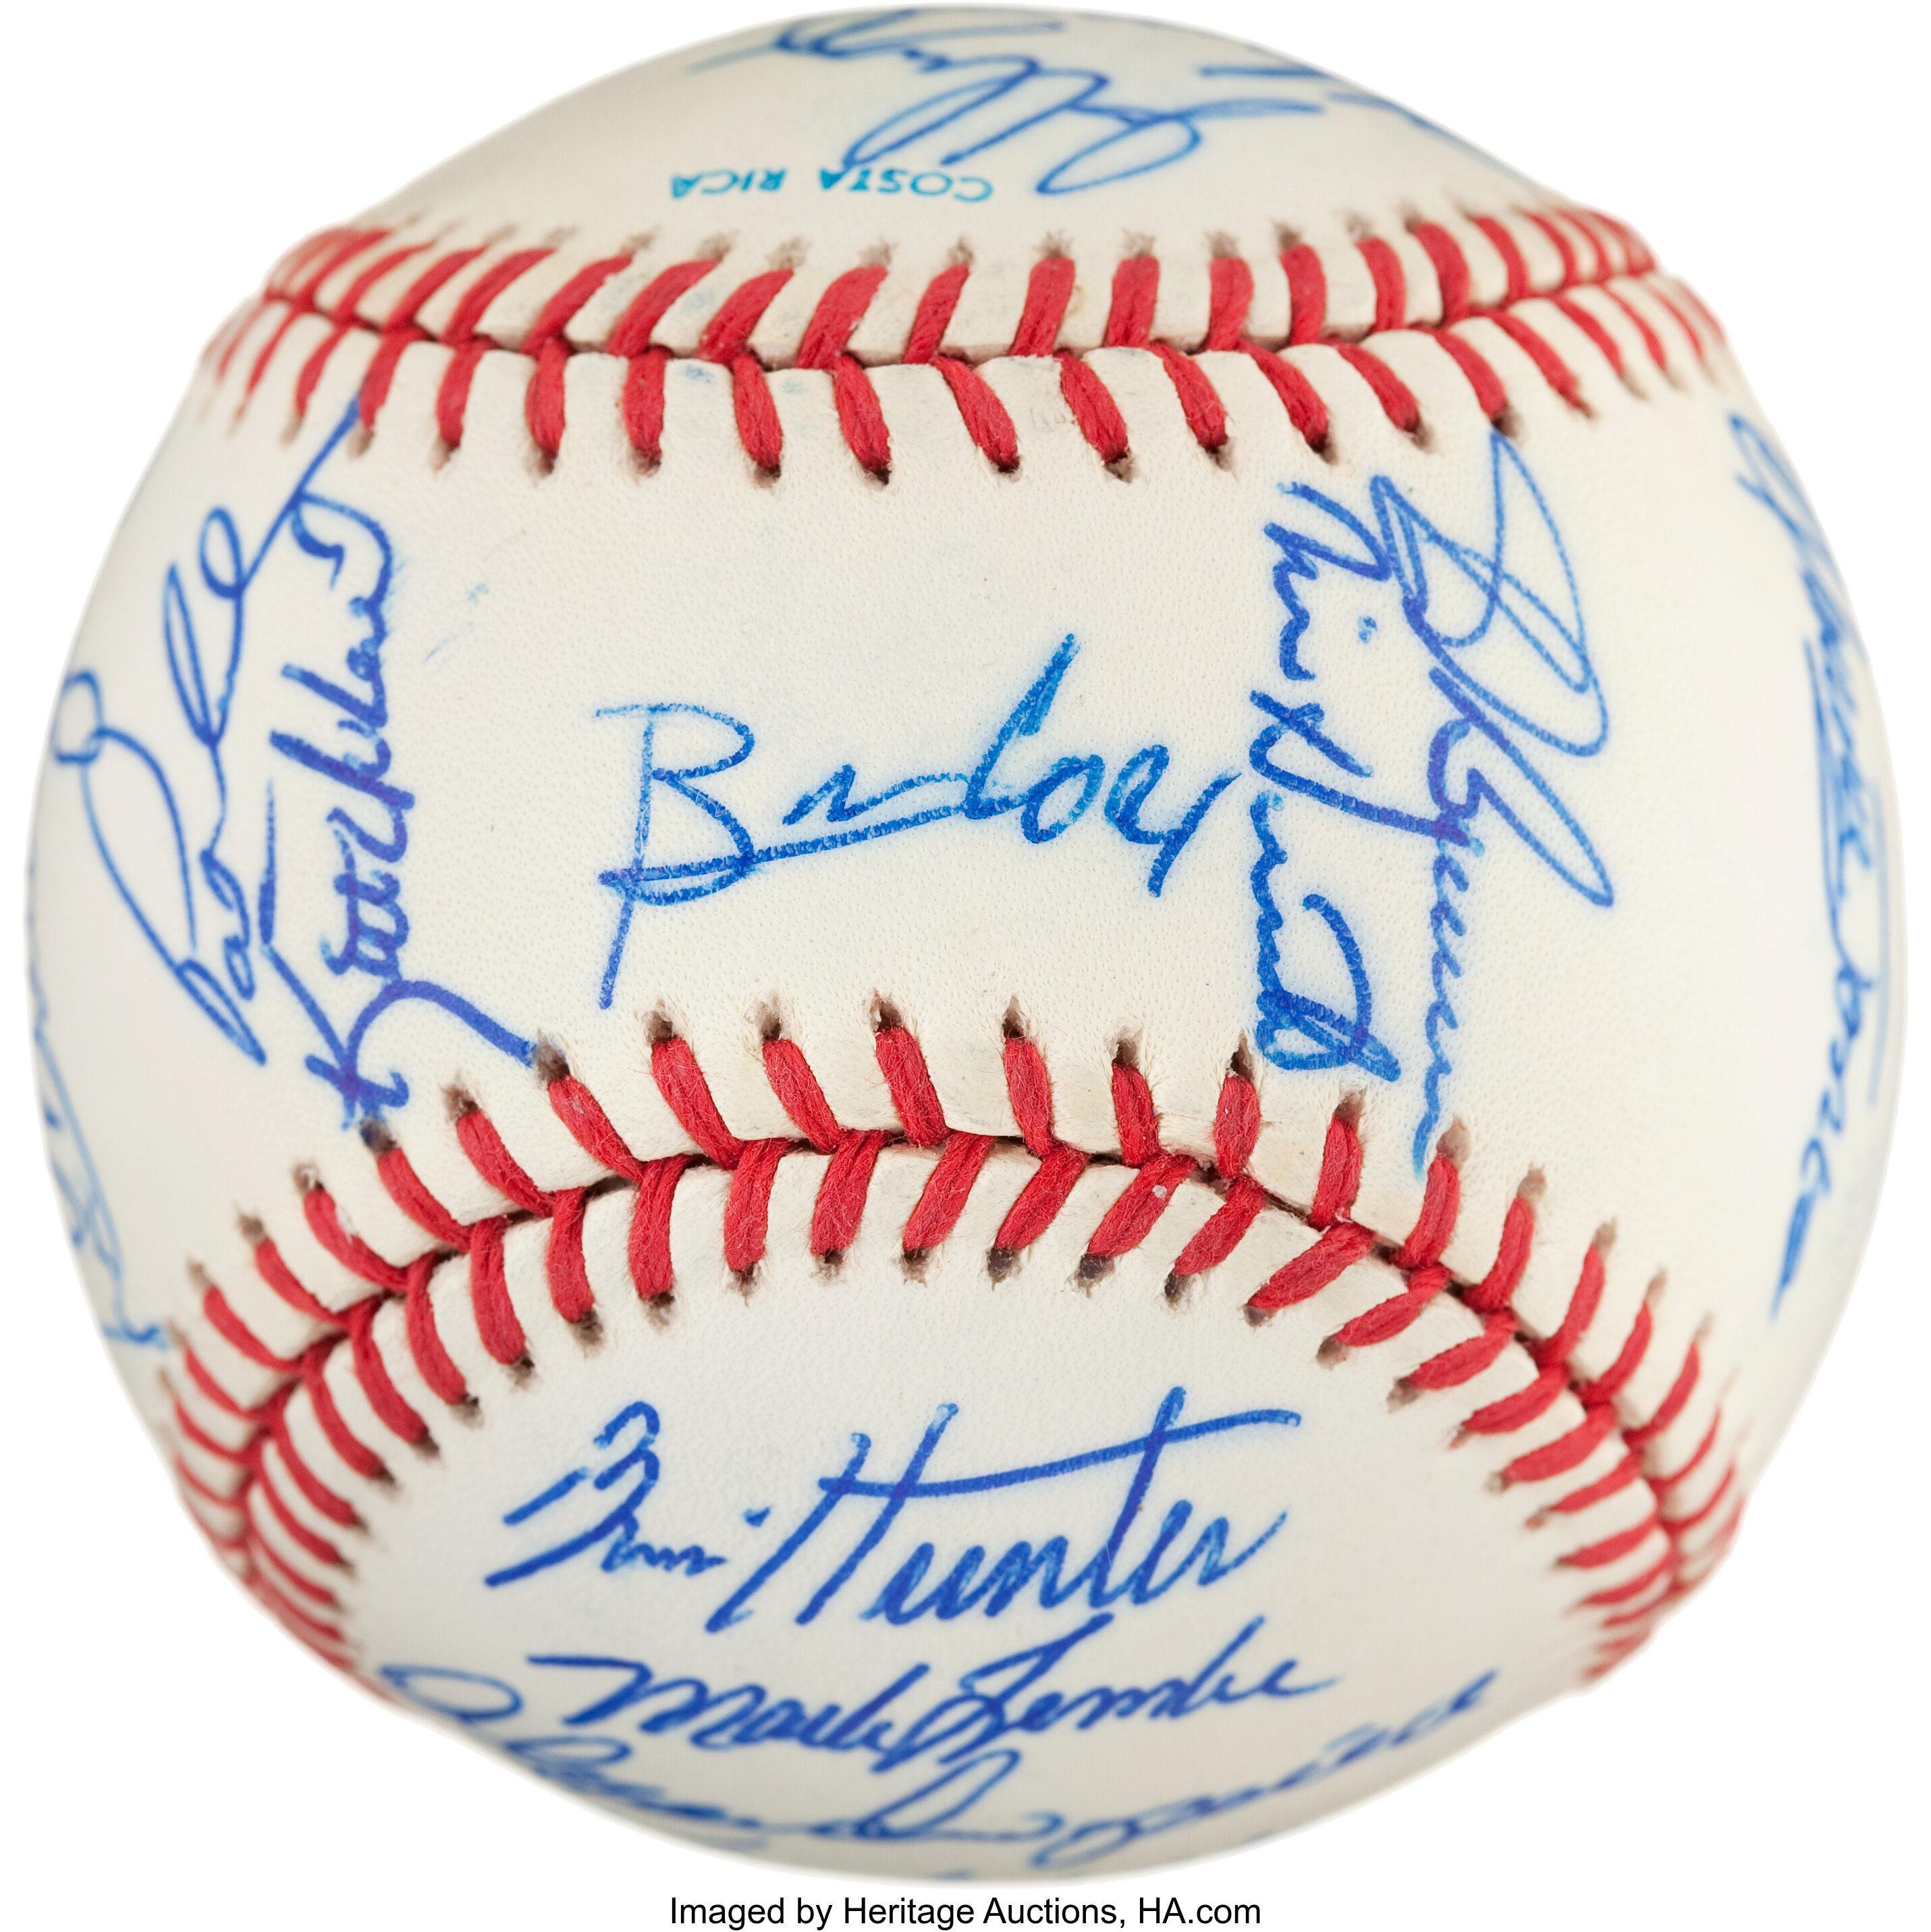 The Atlanta Braves - Autographed Signed Baseball With Co-Signers